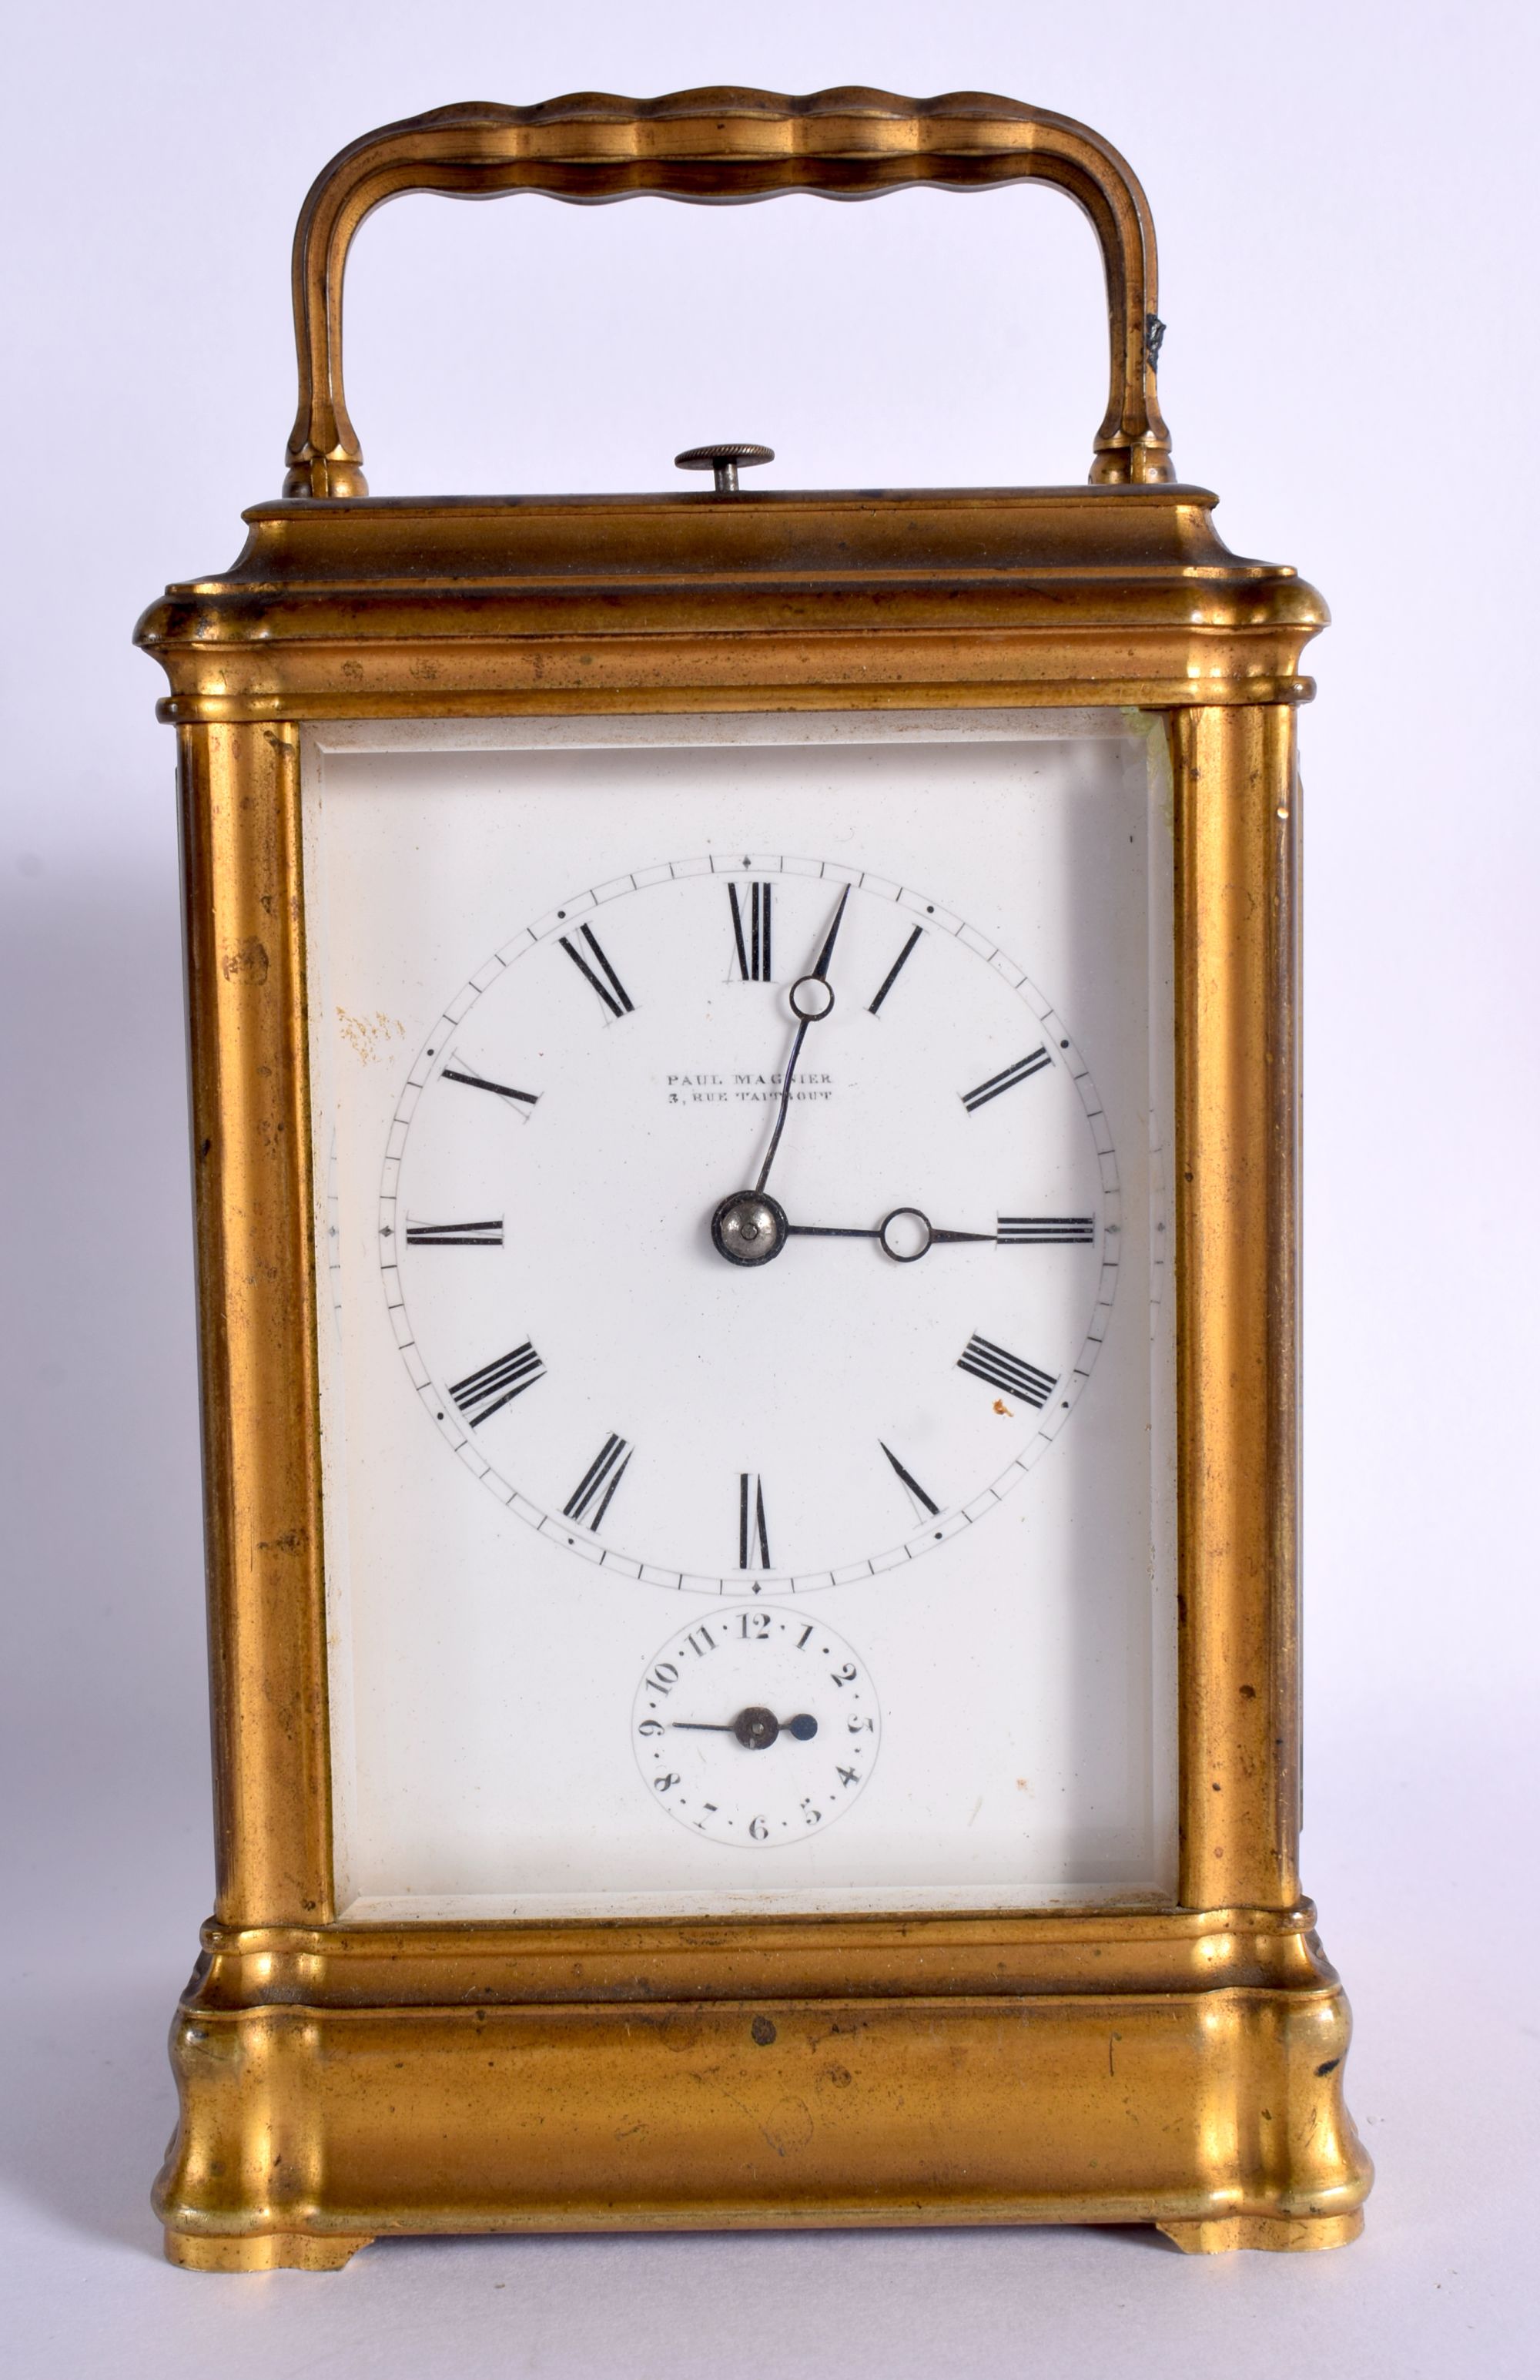 AN ANTIQUE FRENCH BRASS REPEATING CARRIAGE CLOCK retailed by Paul Magnier of Paris, with subsidiary